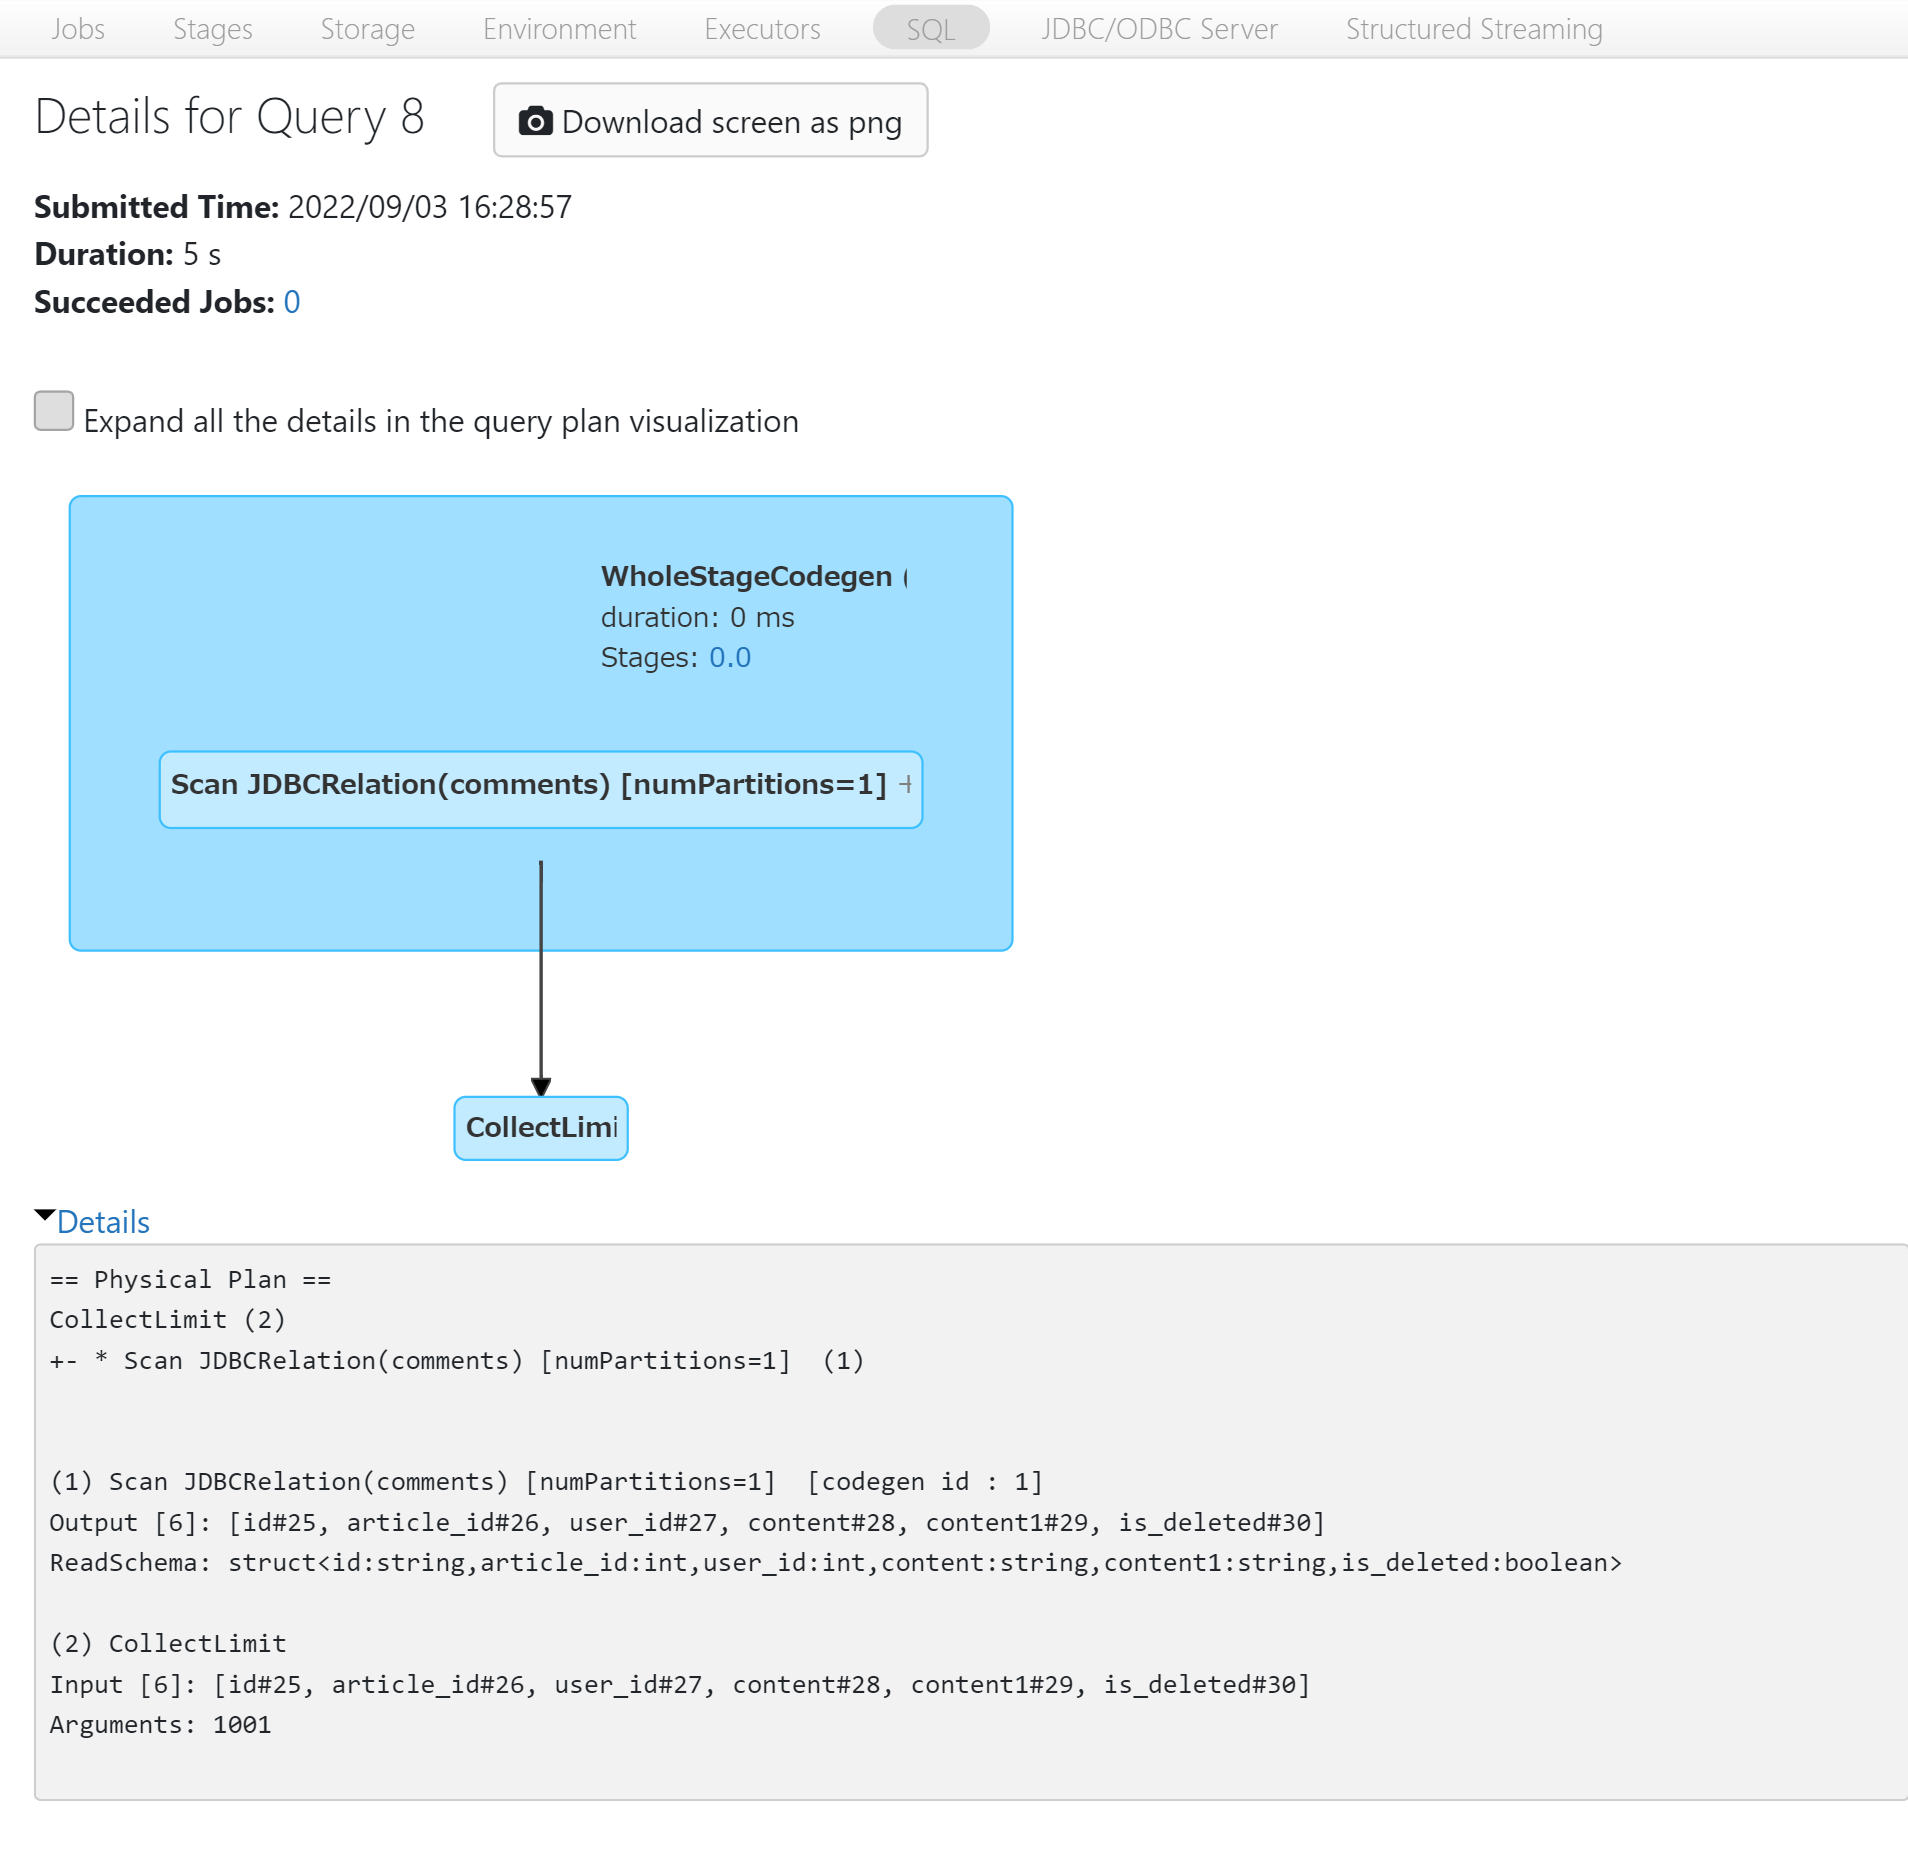 Databricks_Shell_-Details_for_Query_8(1).png